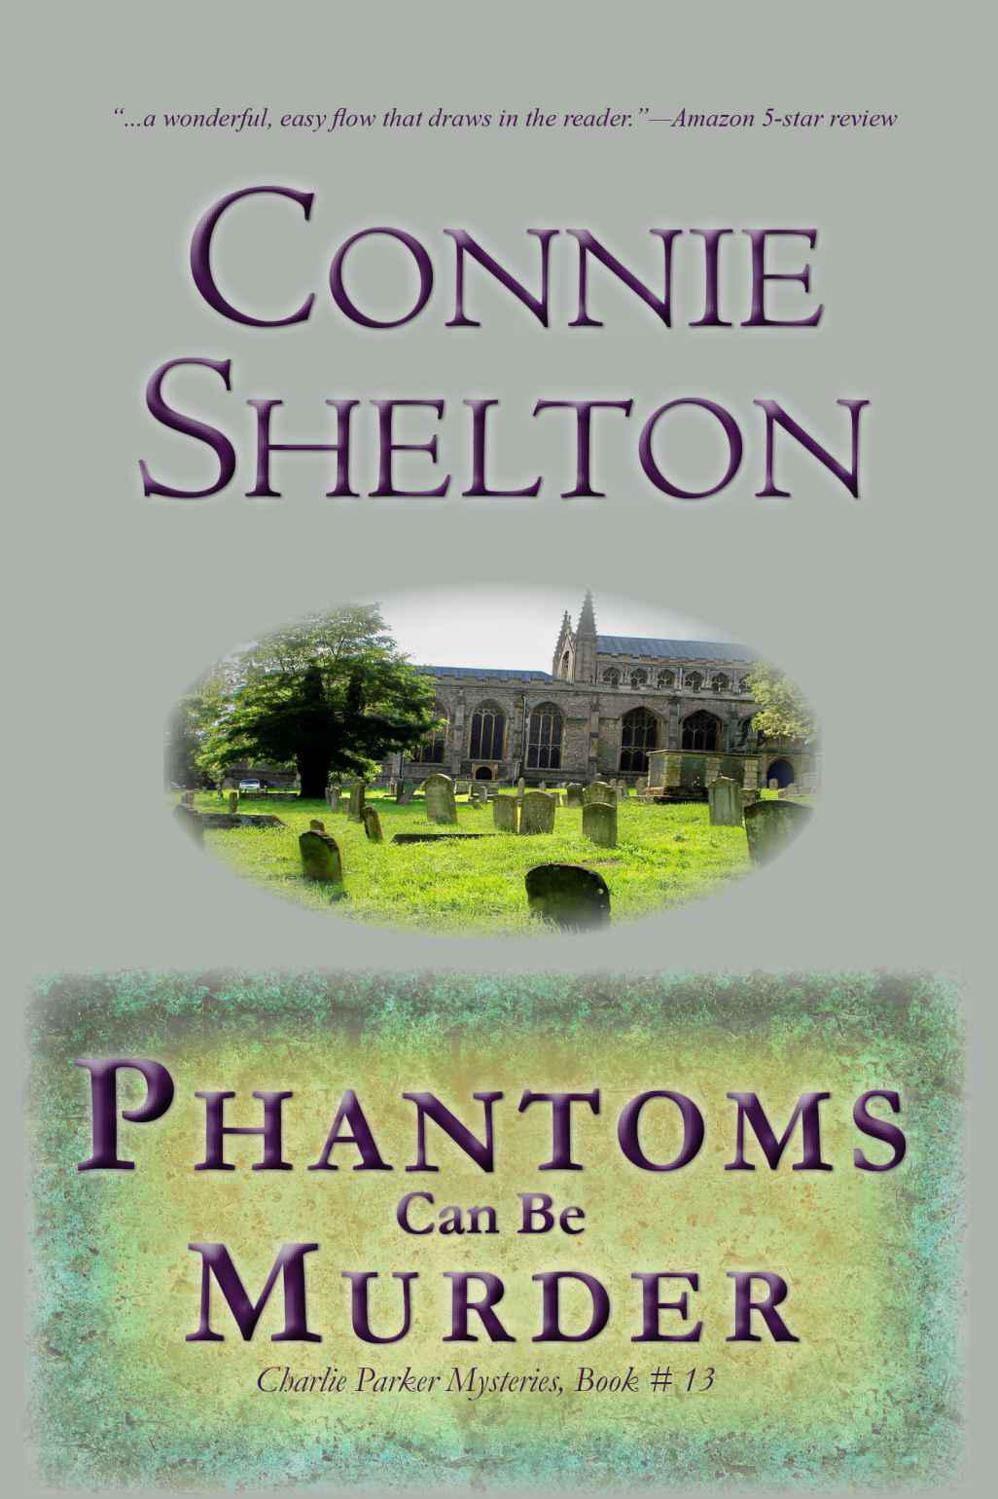 Phantoms Can Be Murder: Charlie Parker Mystery #13 by Connie Shelton